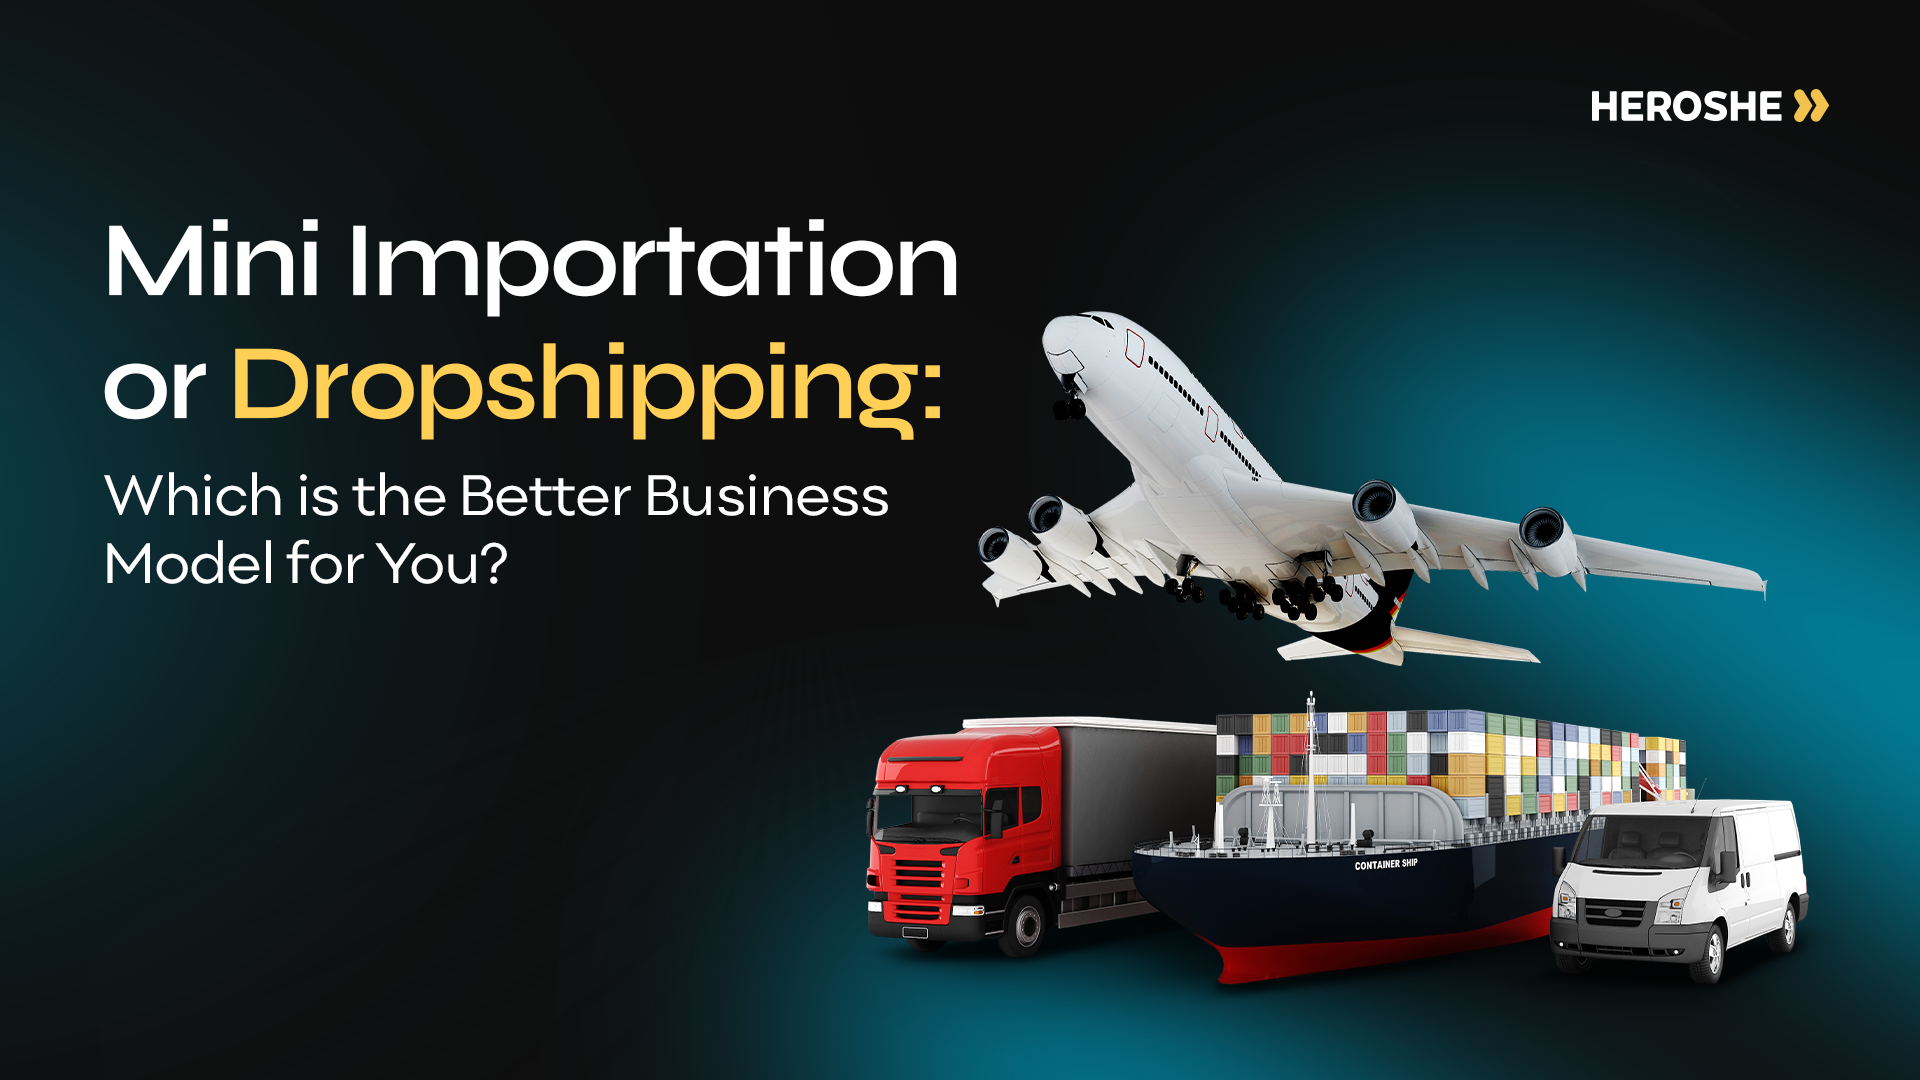 Mini Importation or Dropshipping: Which is the Better Business Model for You?